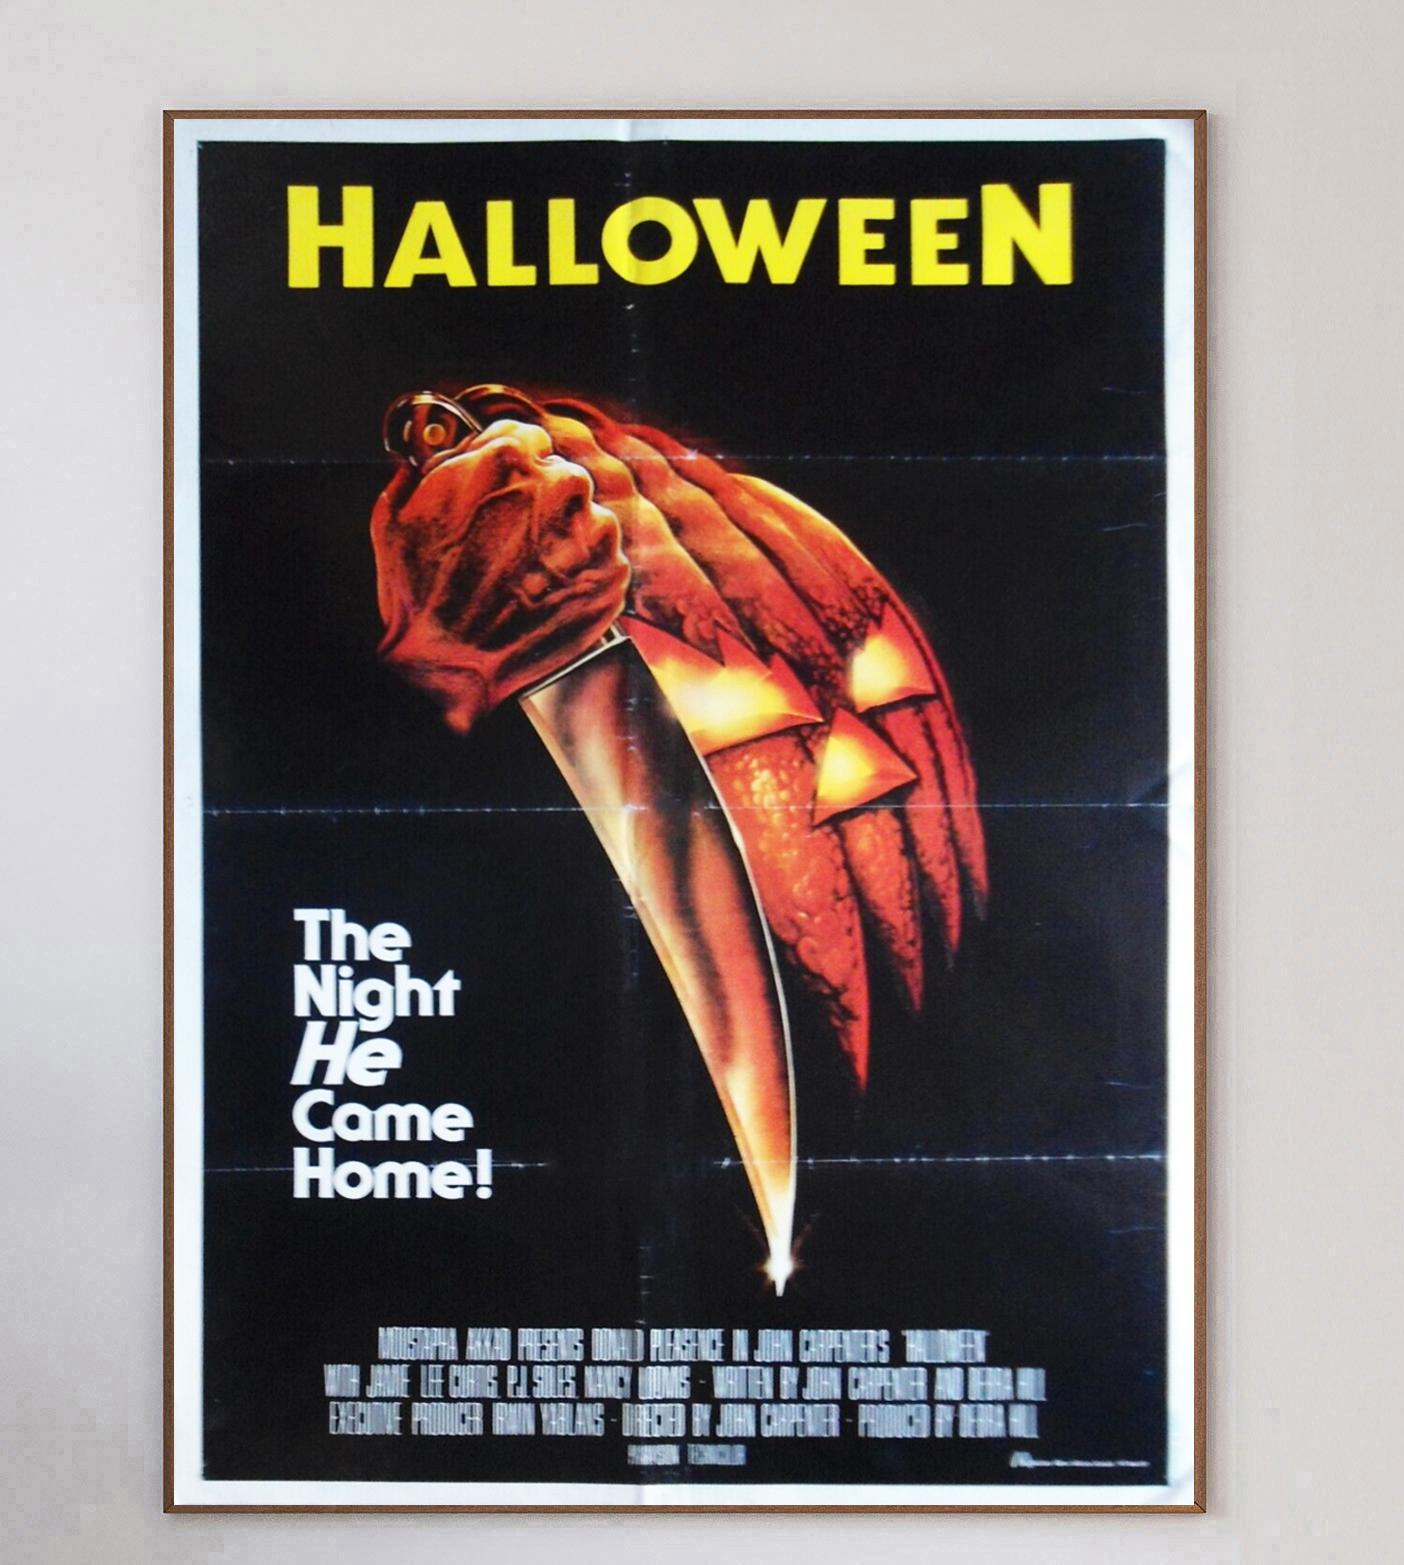 One of the greatest and influential horror films of all time, John Carpenter's 